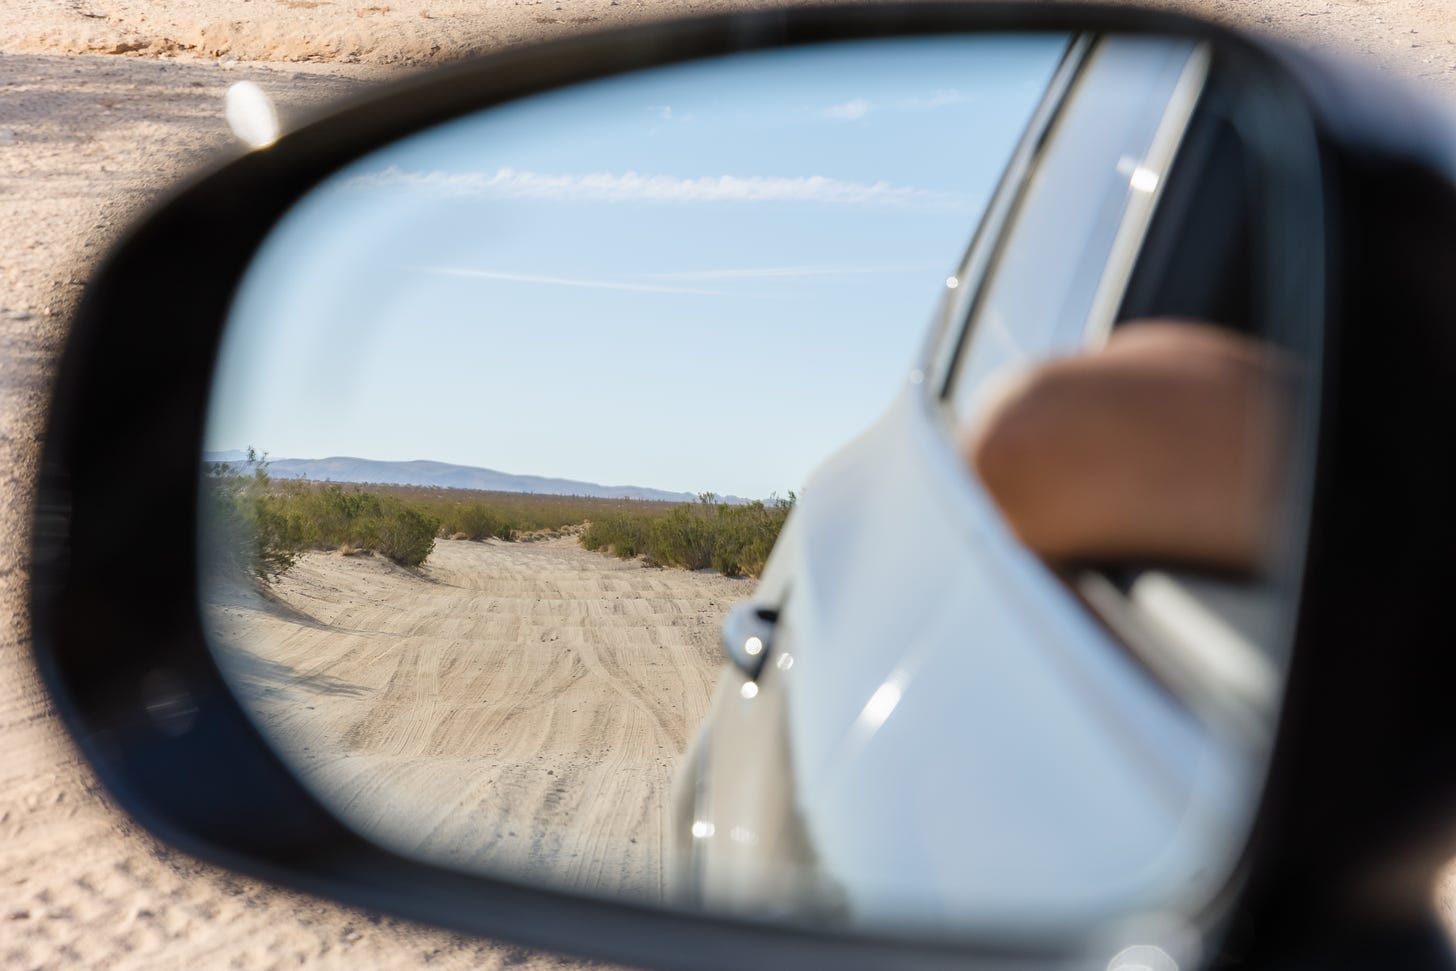 Daytime image of a rearview side car mirror, viewing a wavy, sand road in the middle ground, an elbow perched on a car window in the foreground, and mountains in the background.